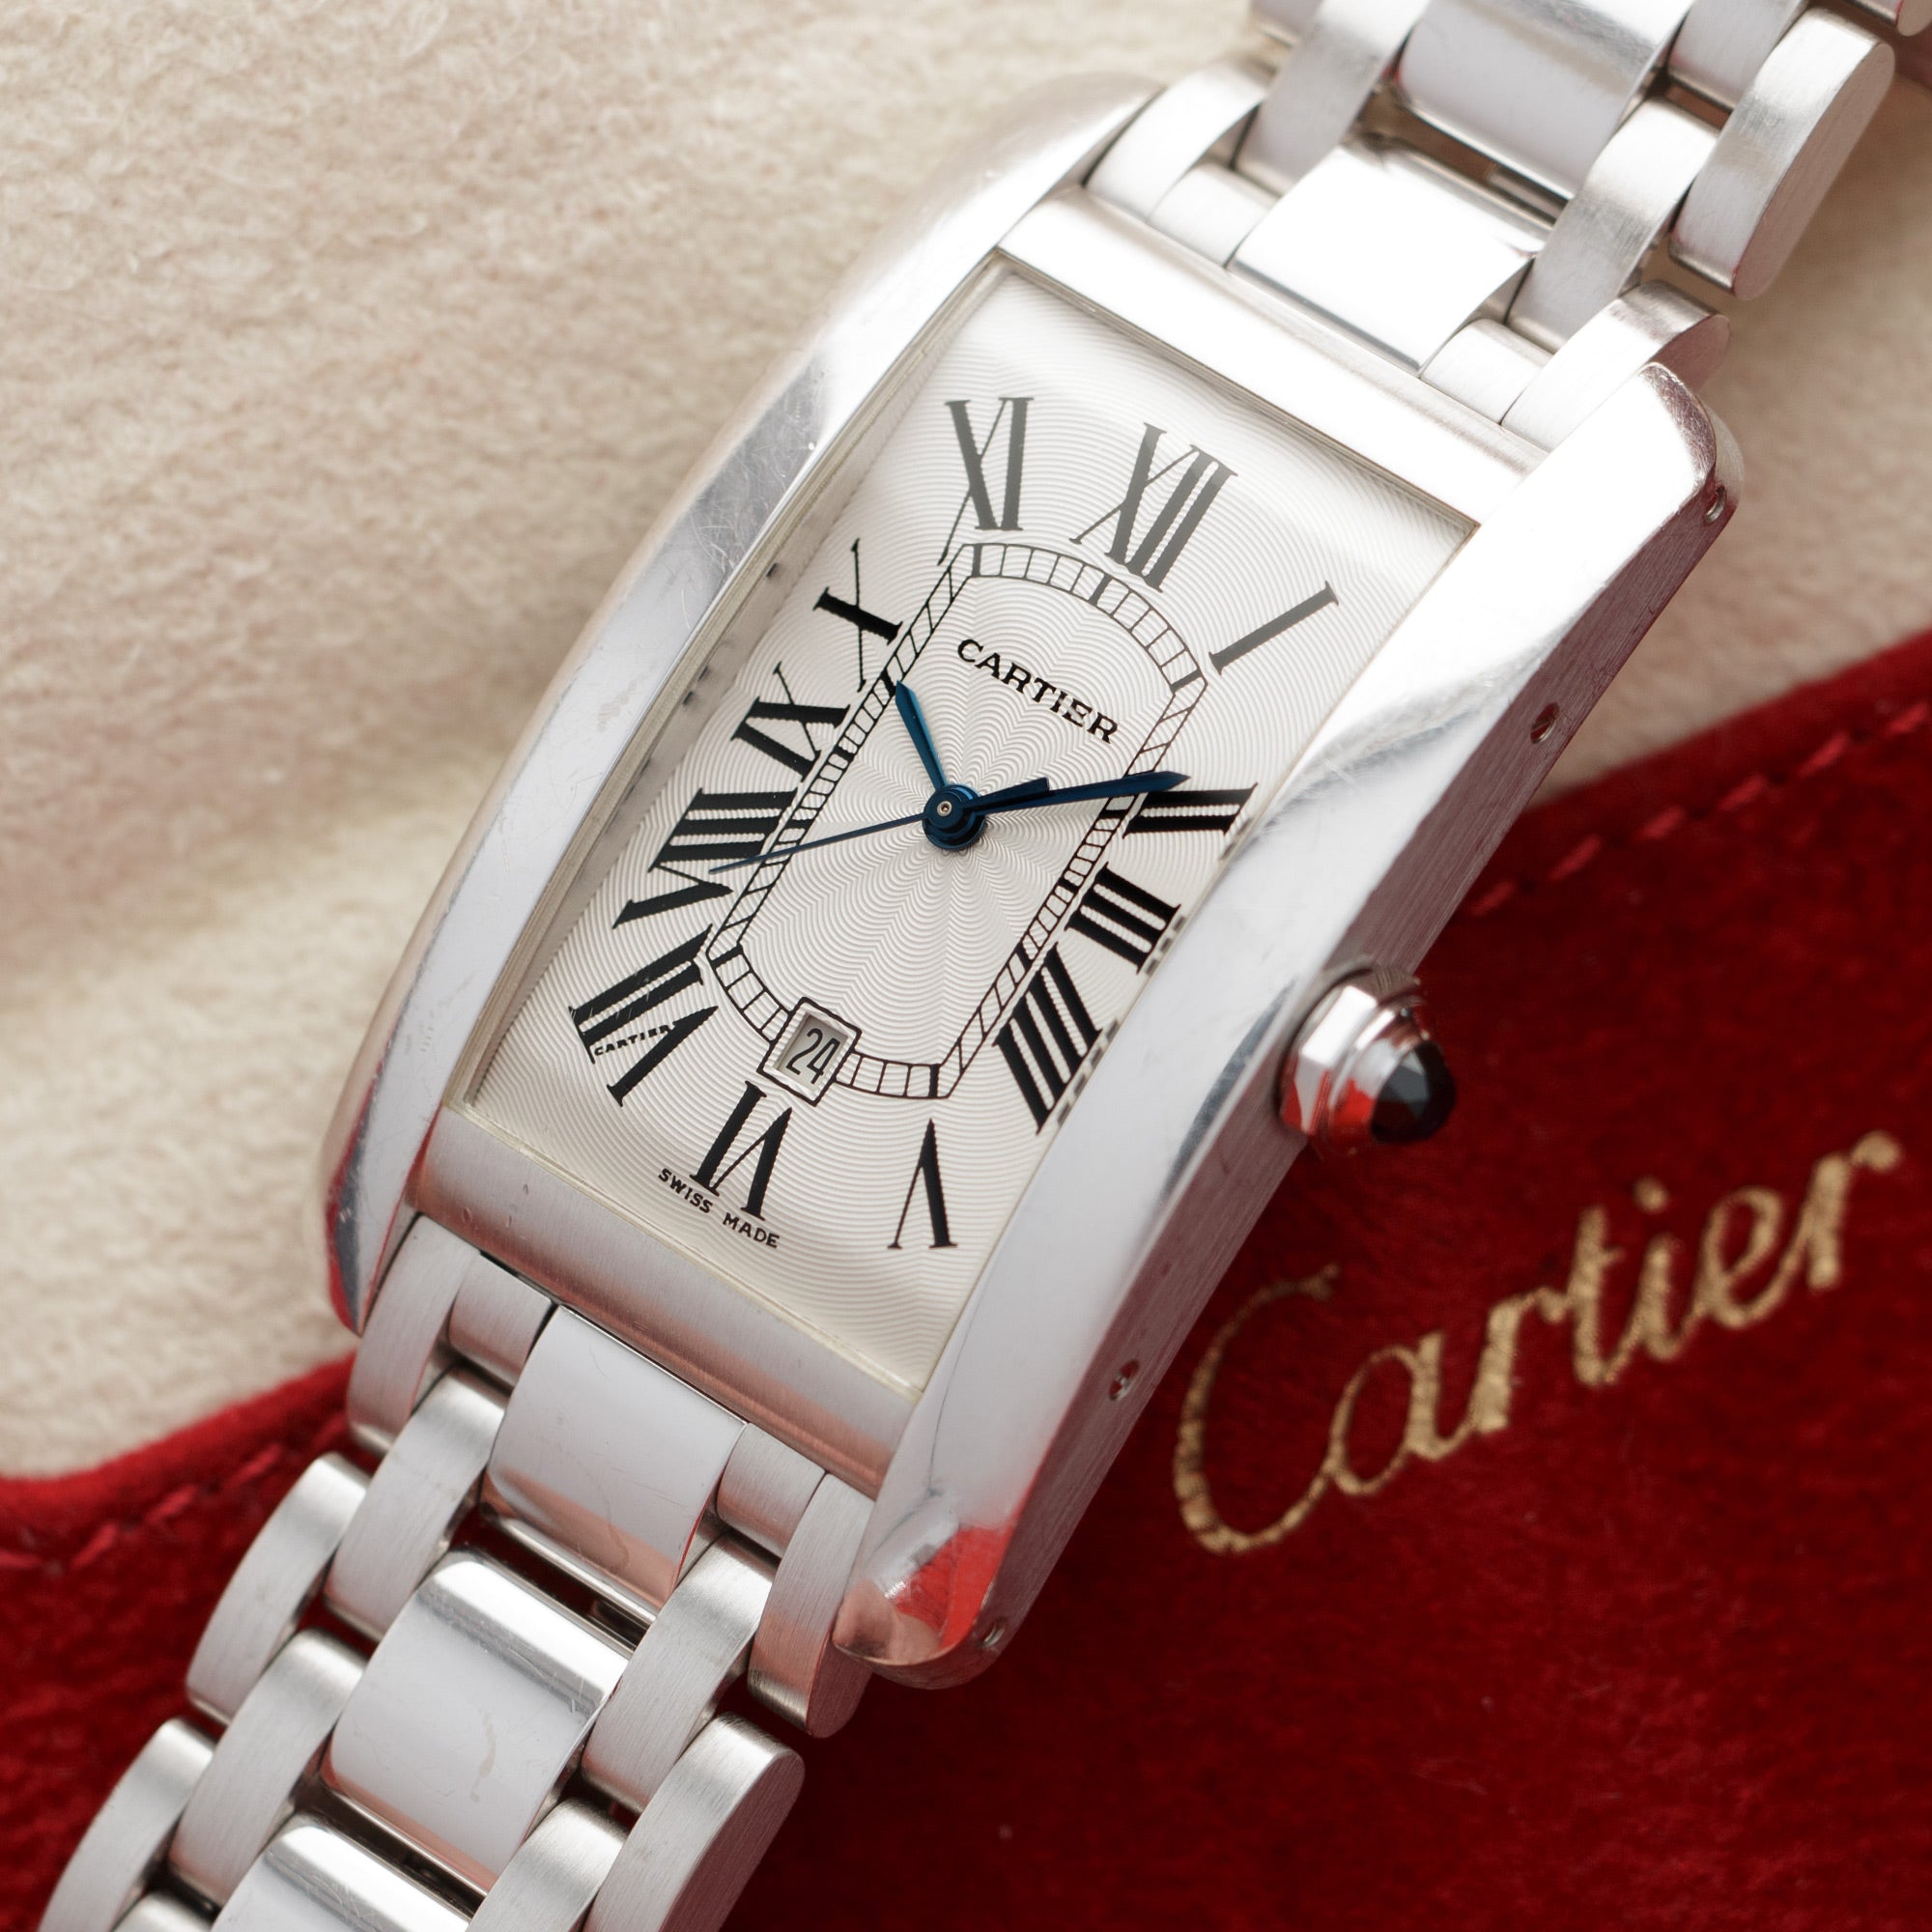 Cartier - Cartier White Gold Tank Americaine XL Ref. 2521 - The Keystone Watches